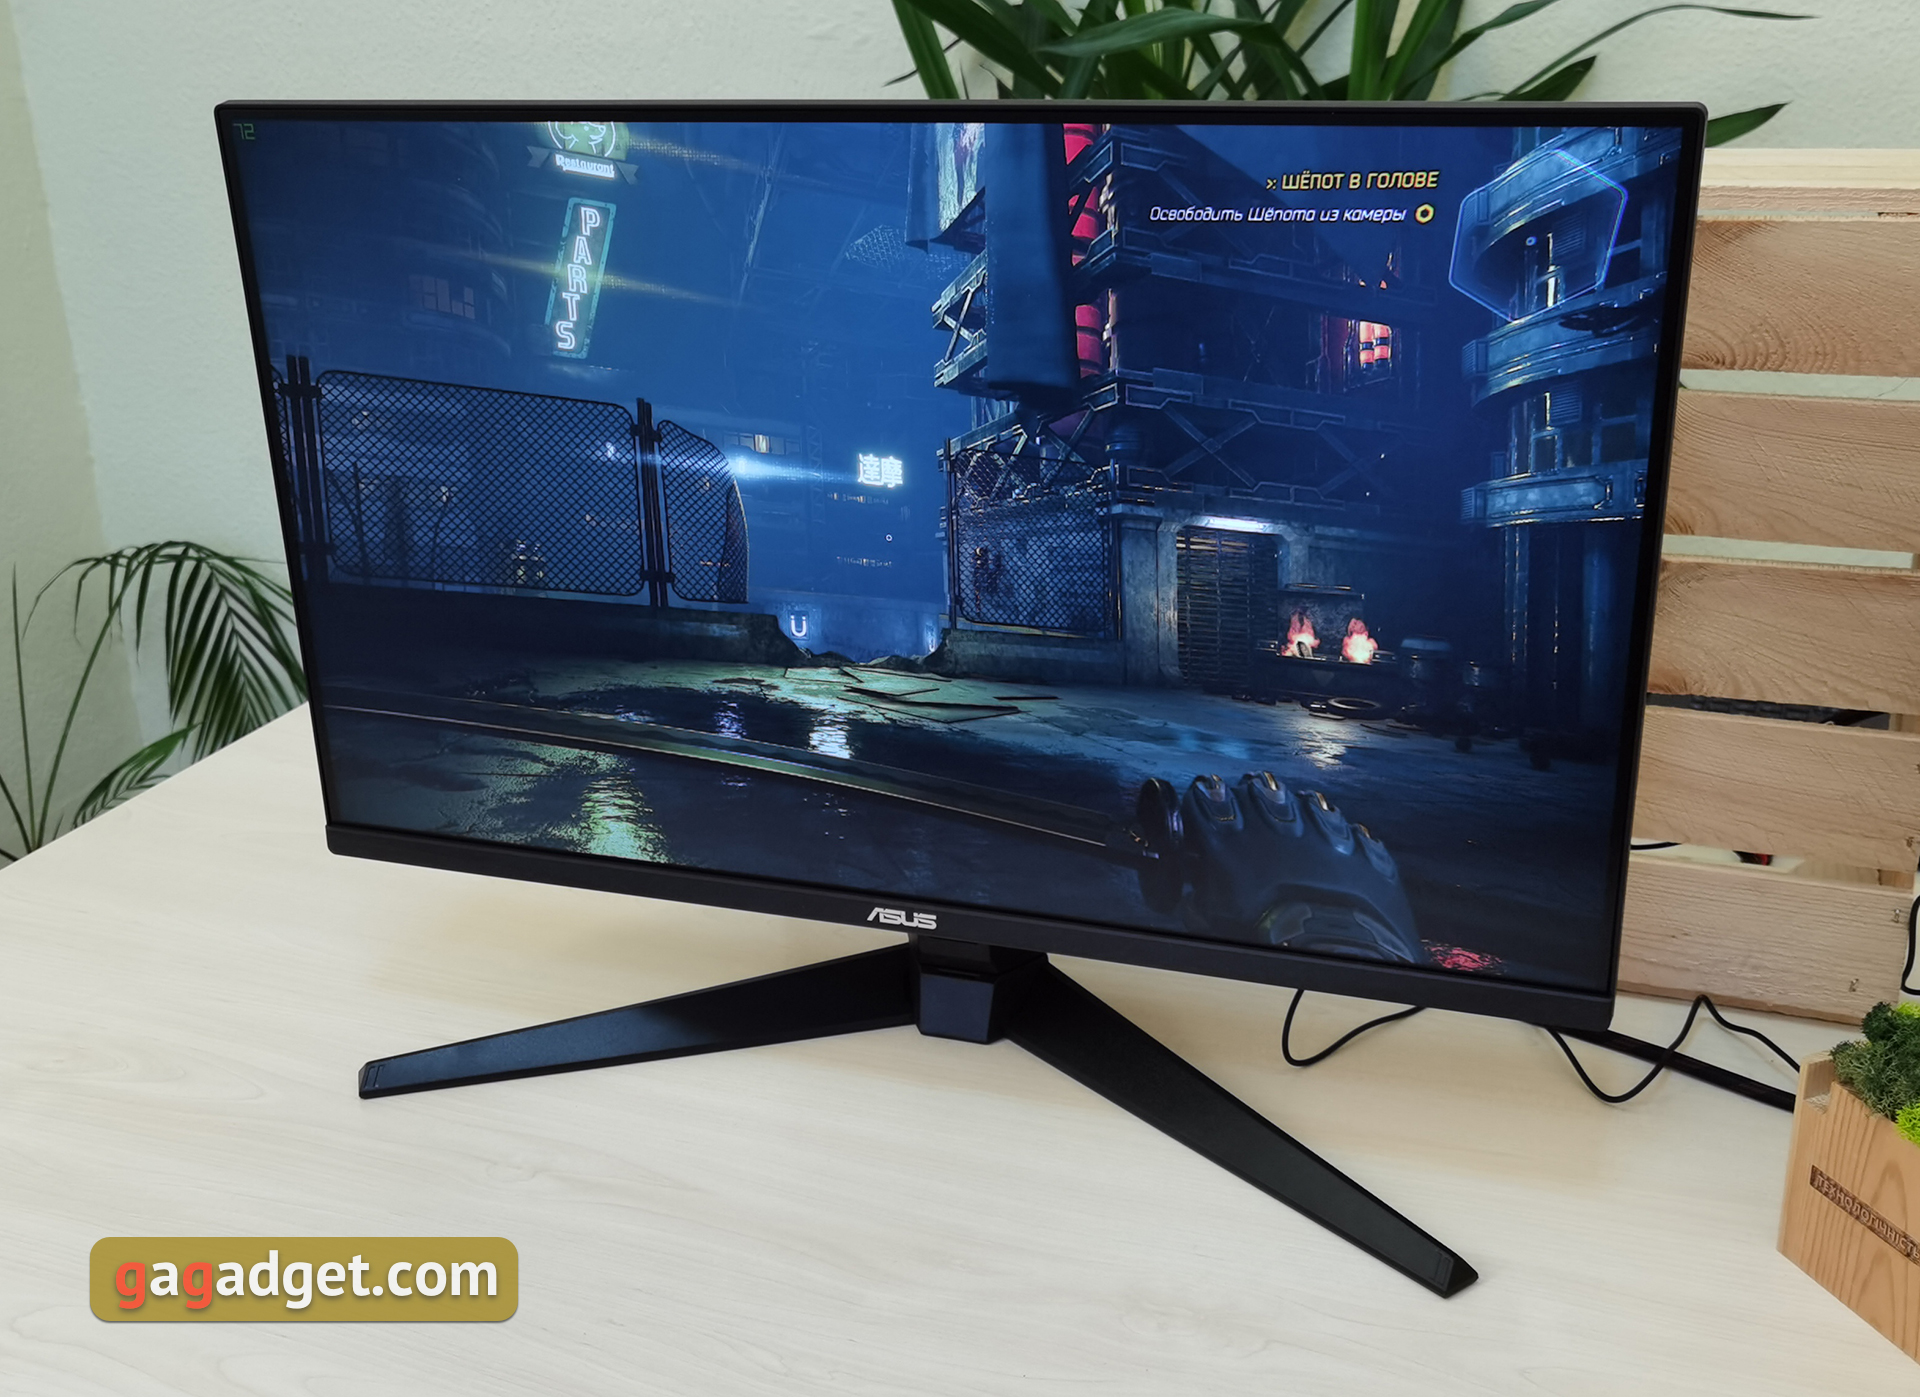 ASUS TUF Gaming VG279Q1A review: 27-inch gaming monitor with IPS panel and 165 Hz refresh rate-9